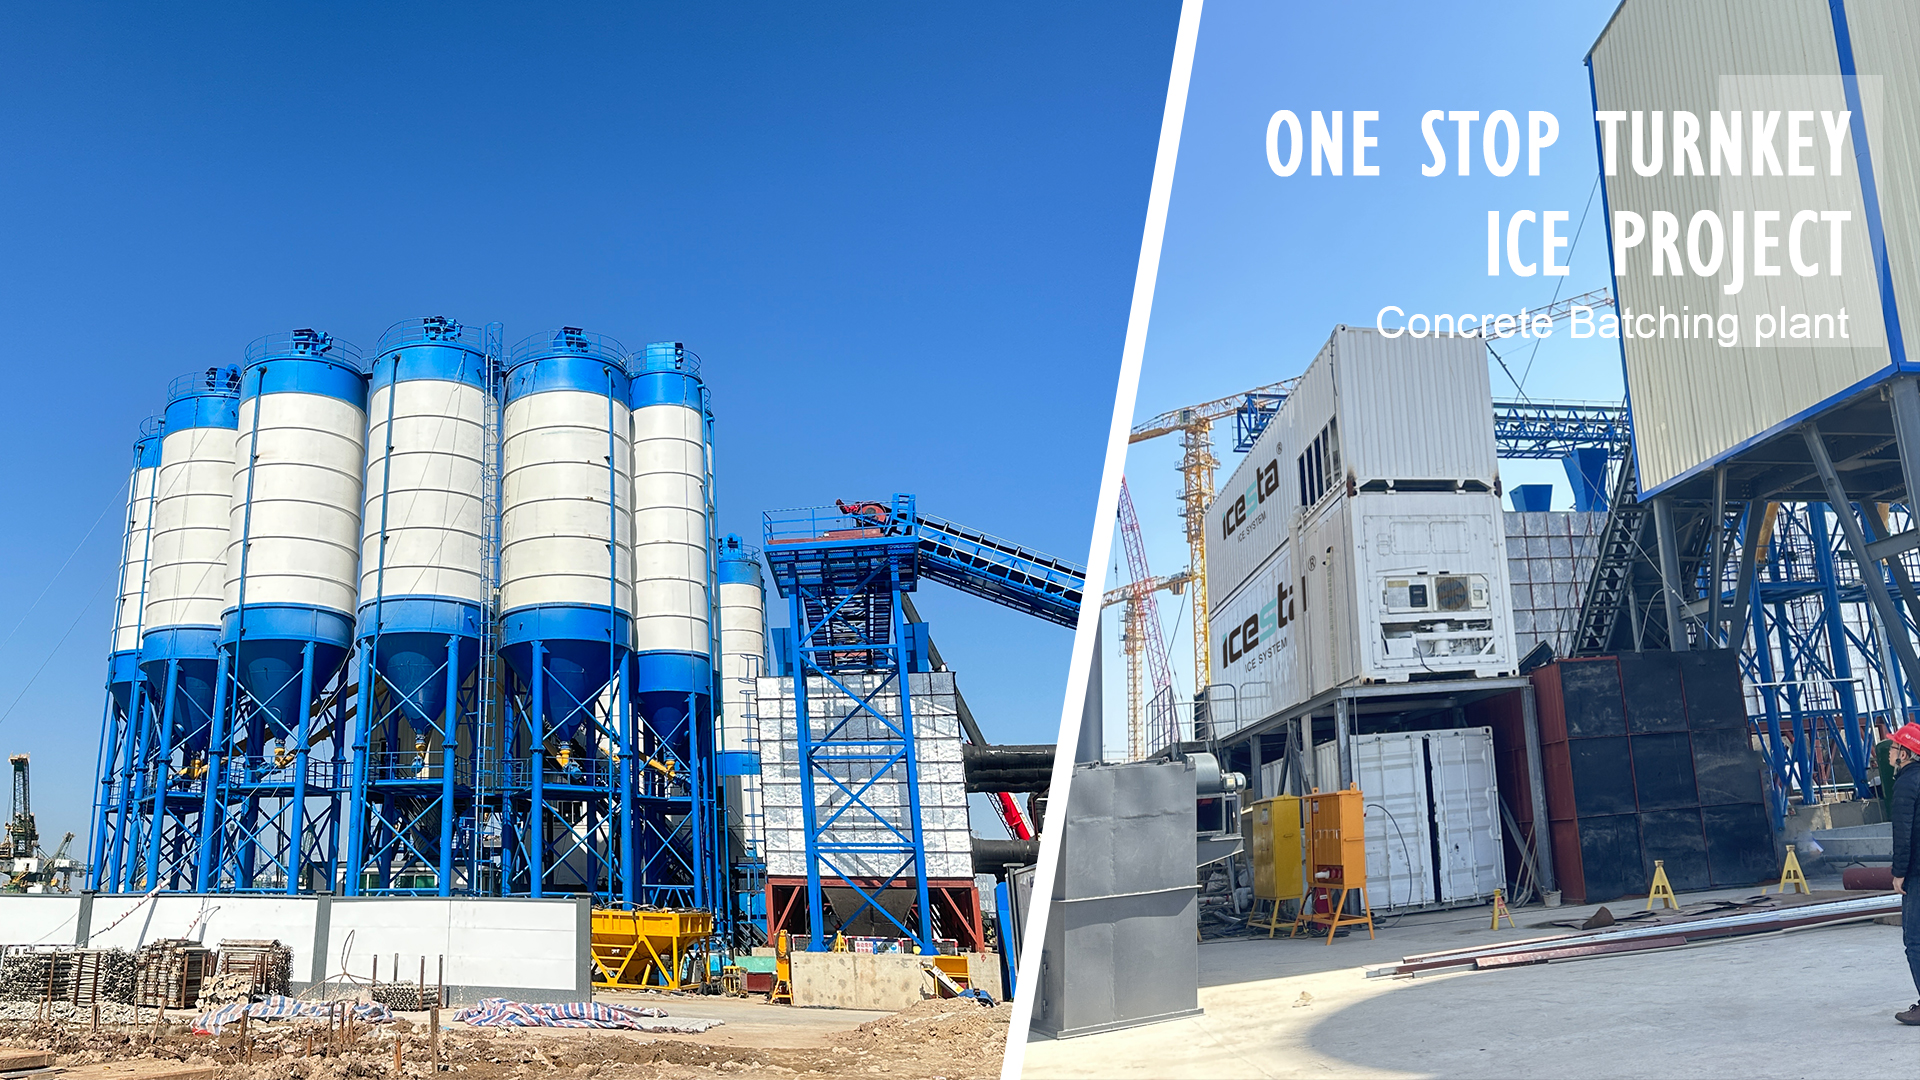 ICESTA One-stop Turnkey Ice Project - Concrete Batching plant cooling system